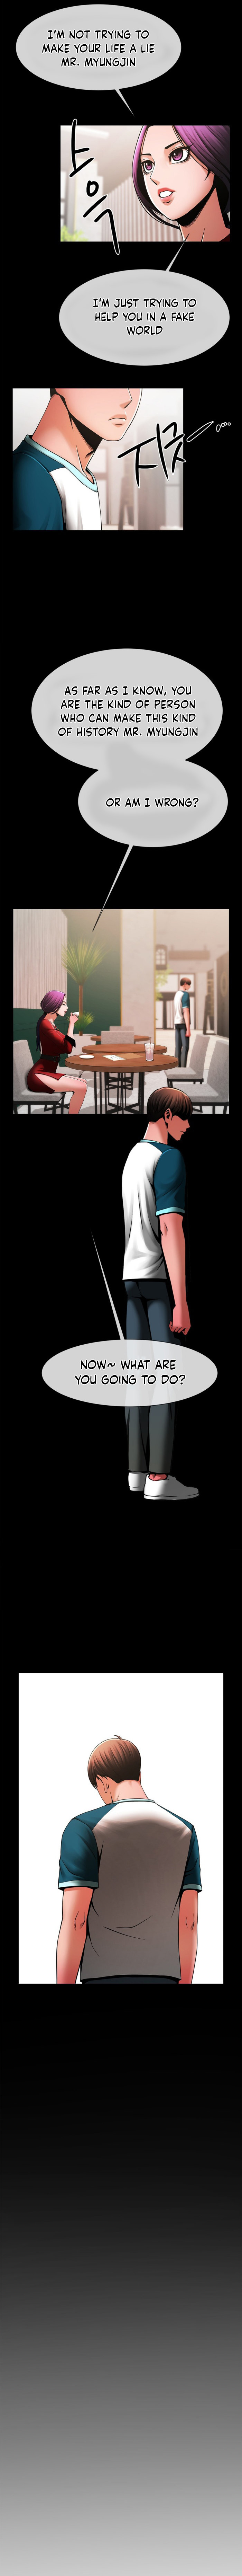 Under the Radar - Chapter 5 Page 12